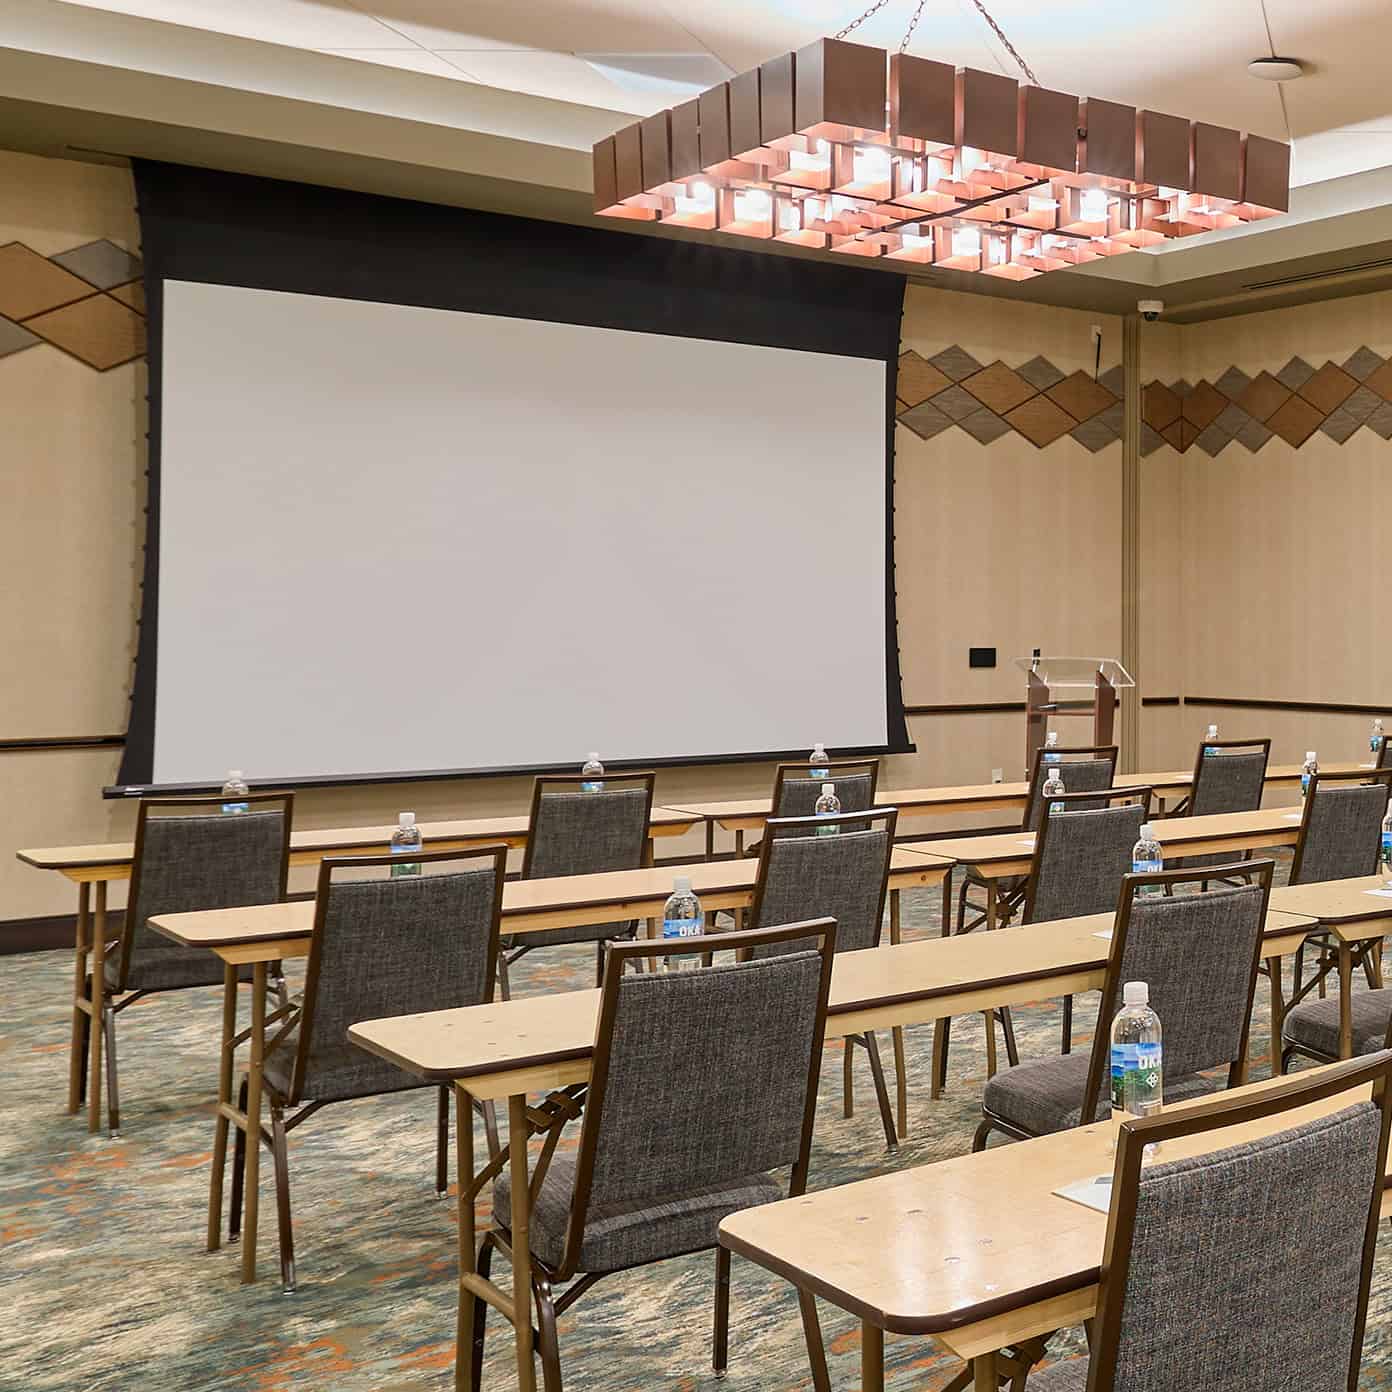 a meeting space is set up with chairs and tables in a row and a projector screen lowered in the front of the room.